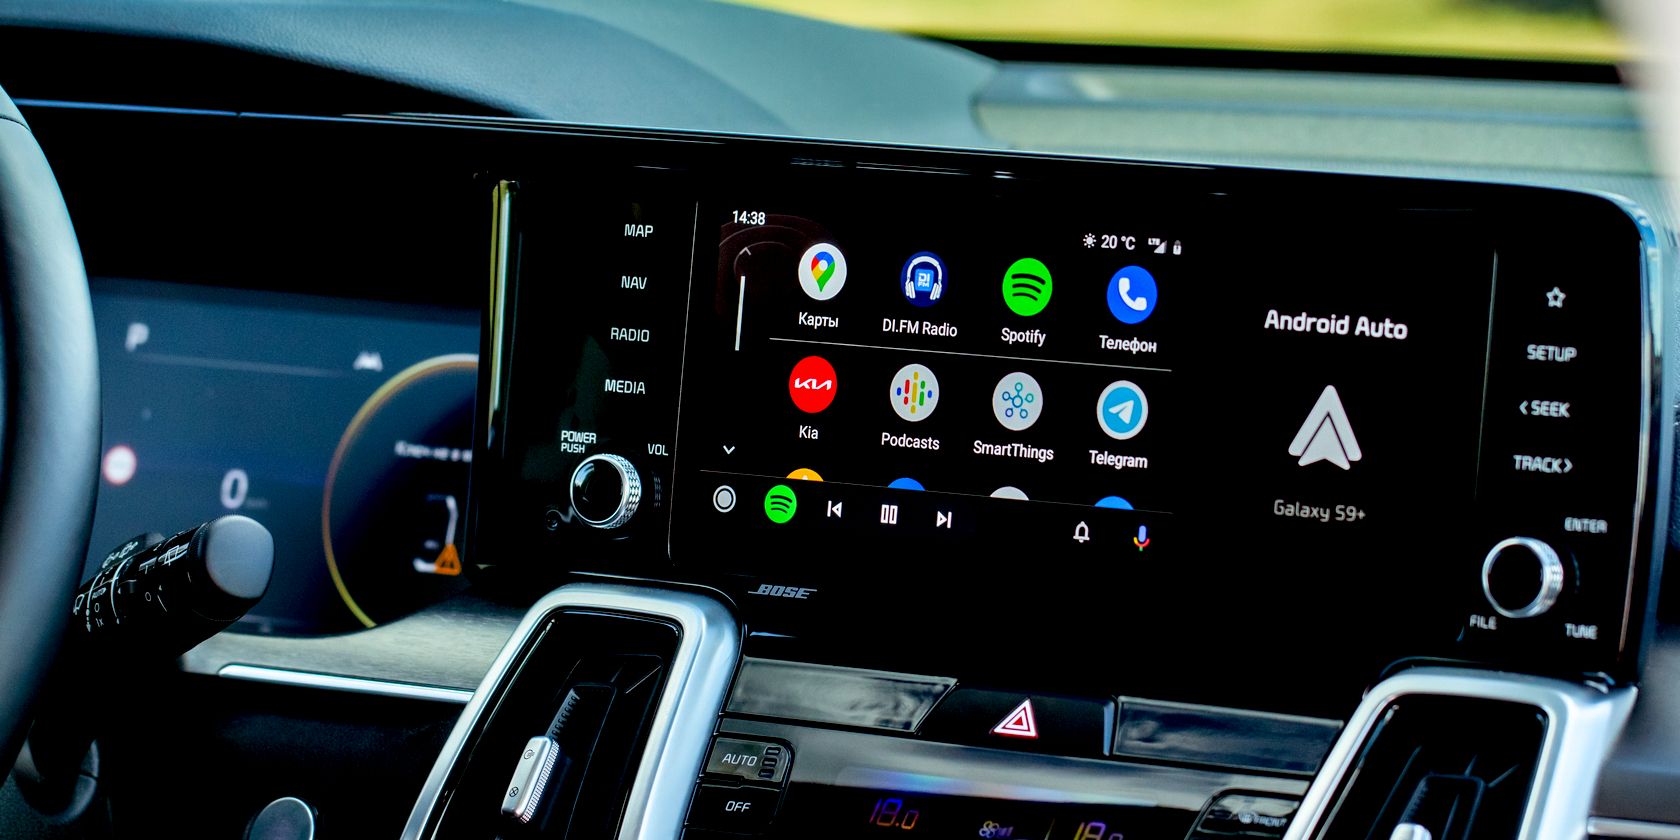 Android Auto on a car infotainment system